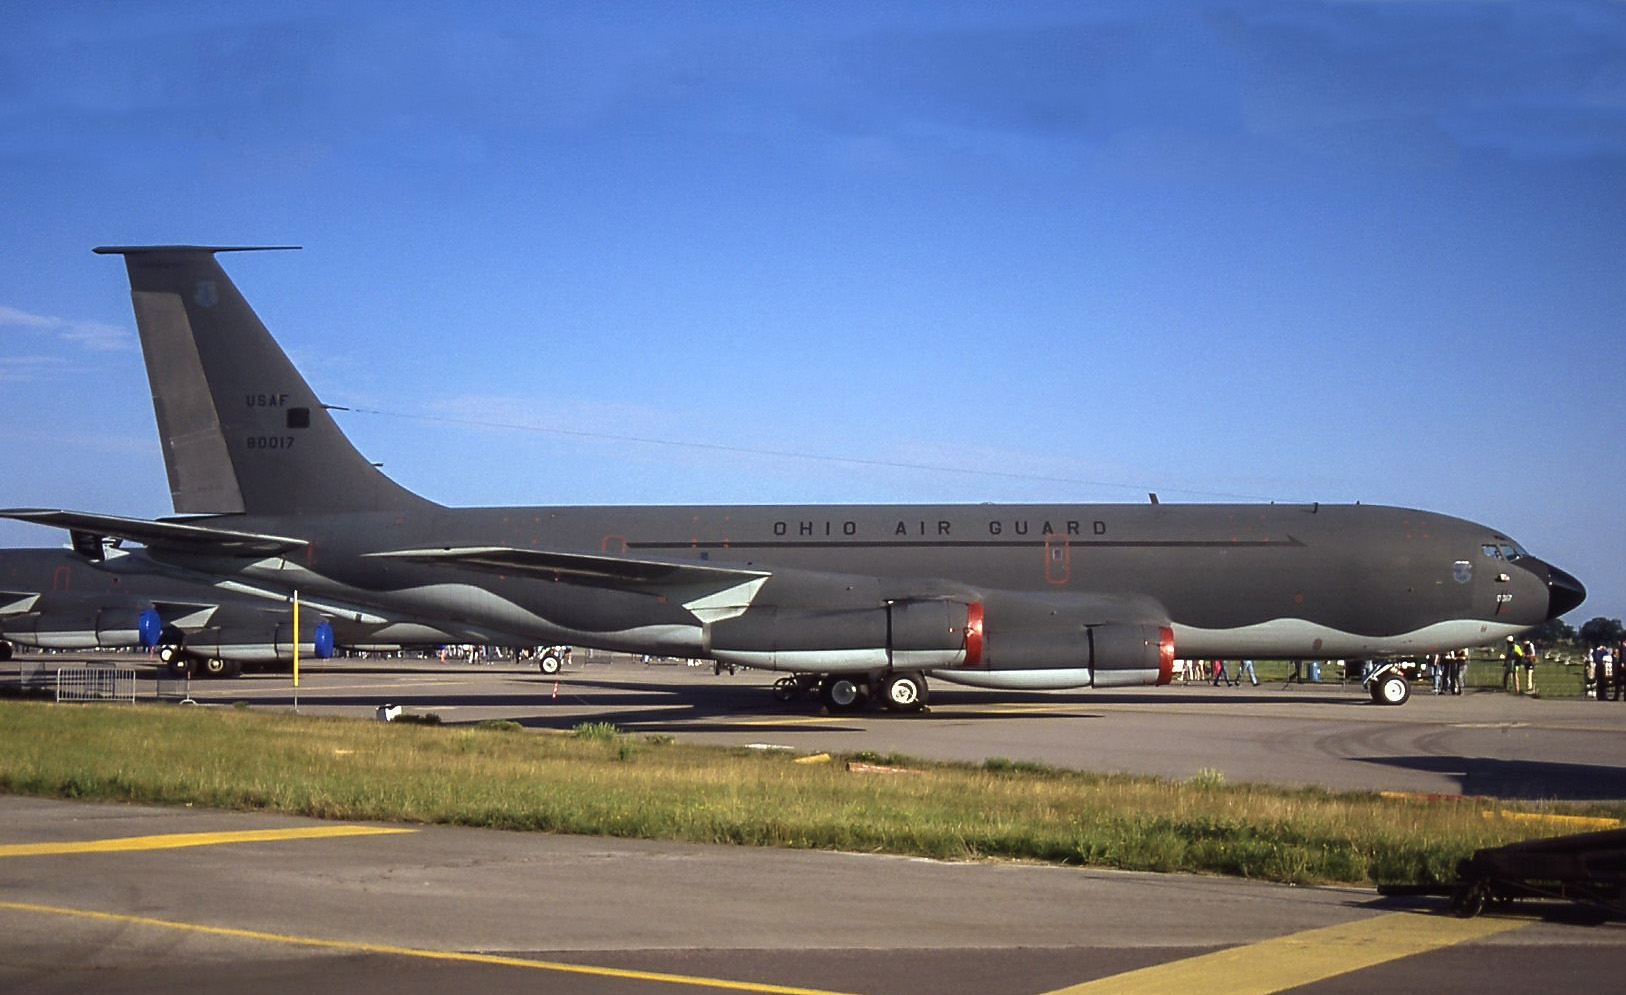 58-0017/580017 USAF - United States Air Force Boeing KC-135E Stratotanker Photo by Ayronautica - AVSpotters.com